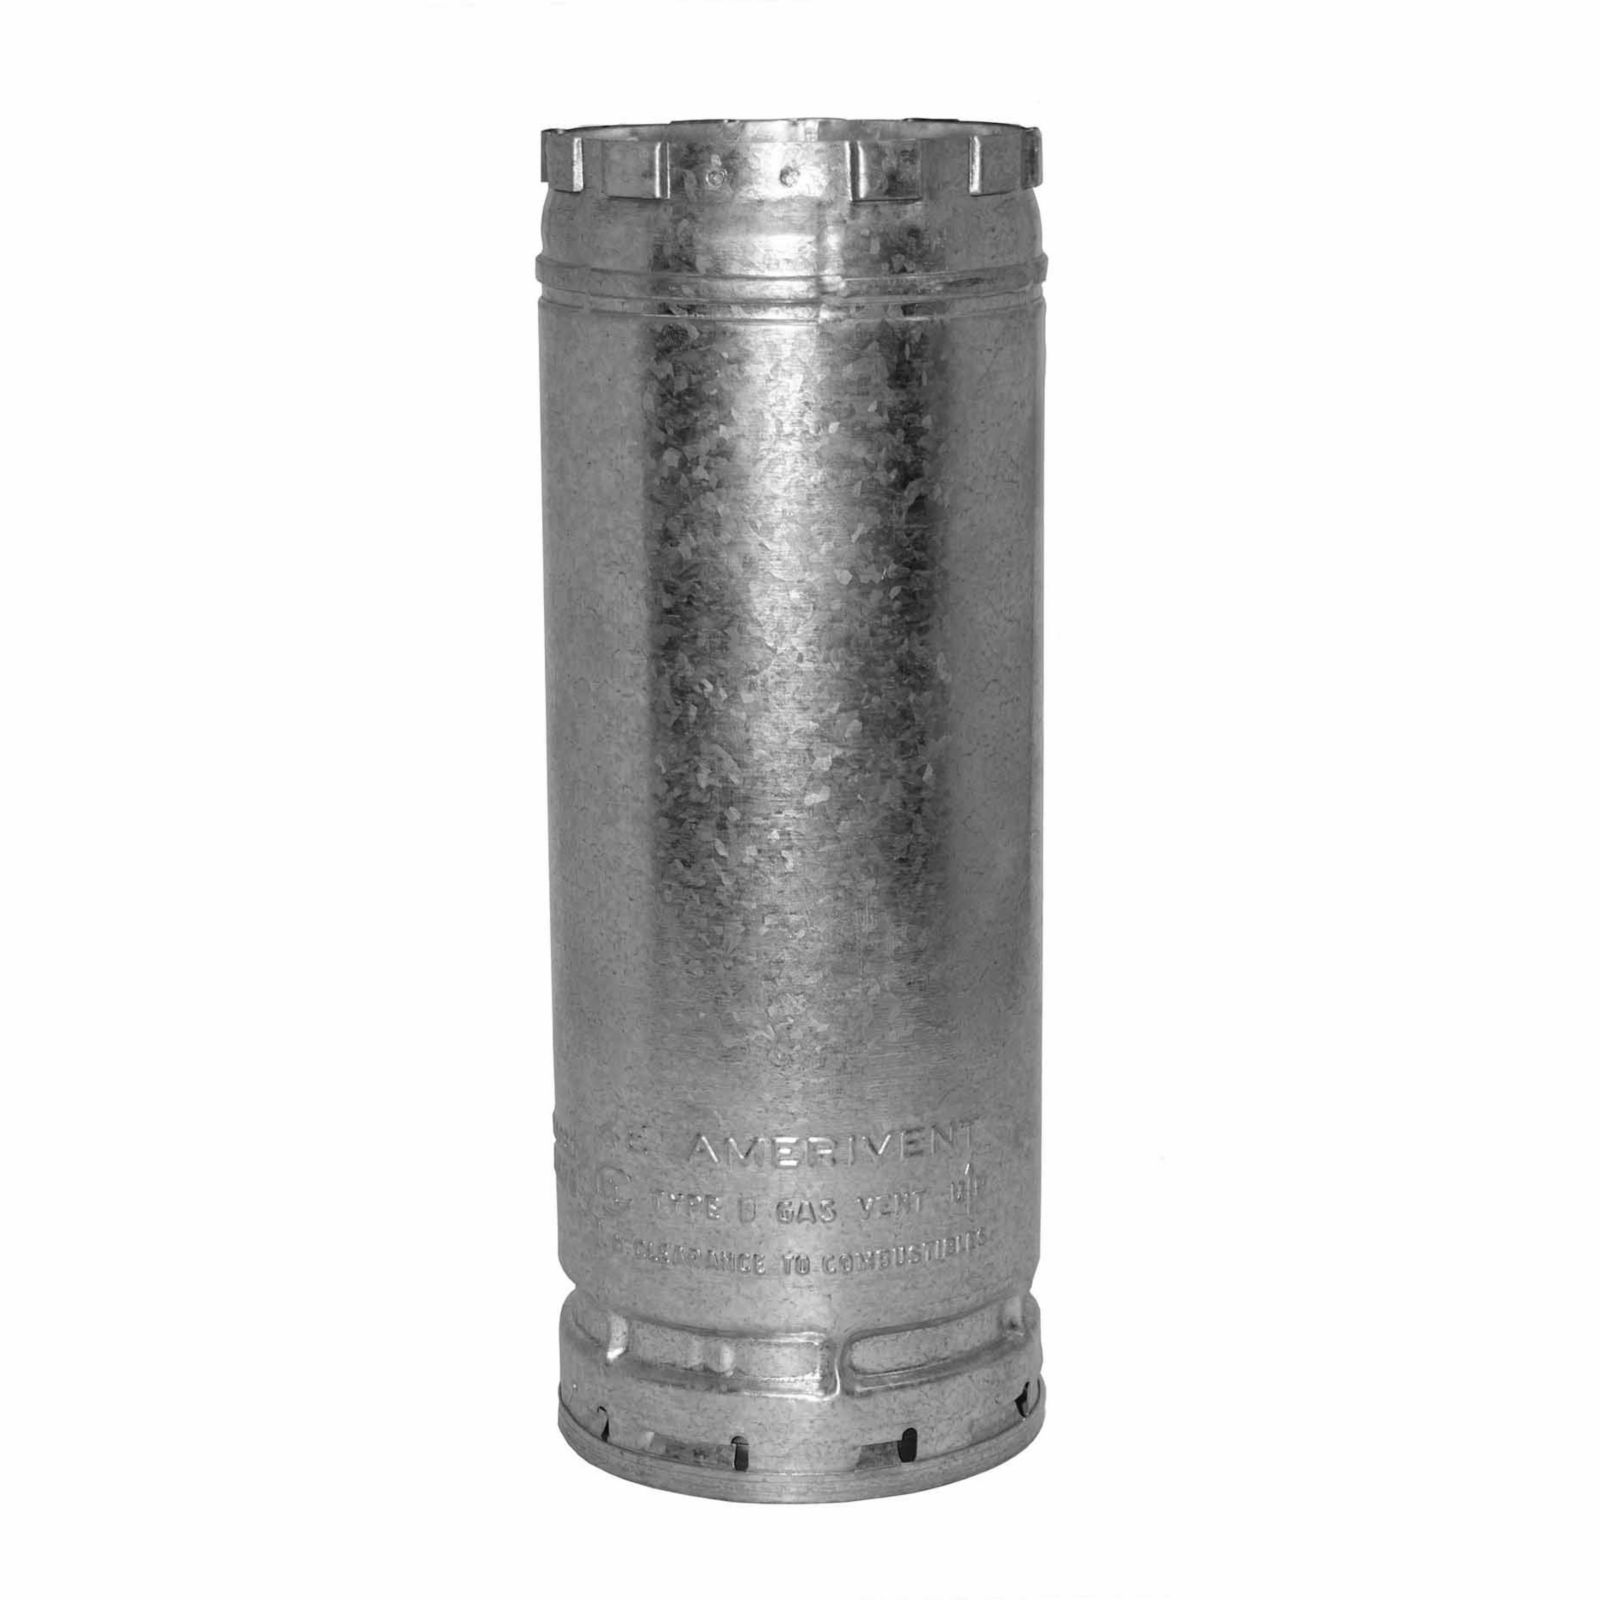 AmeriVent 4E5 - Pipe Section Type B Gas Vent, 4" Round X 60" Length